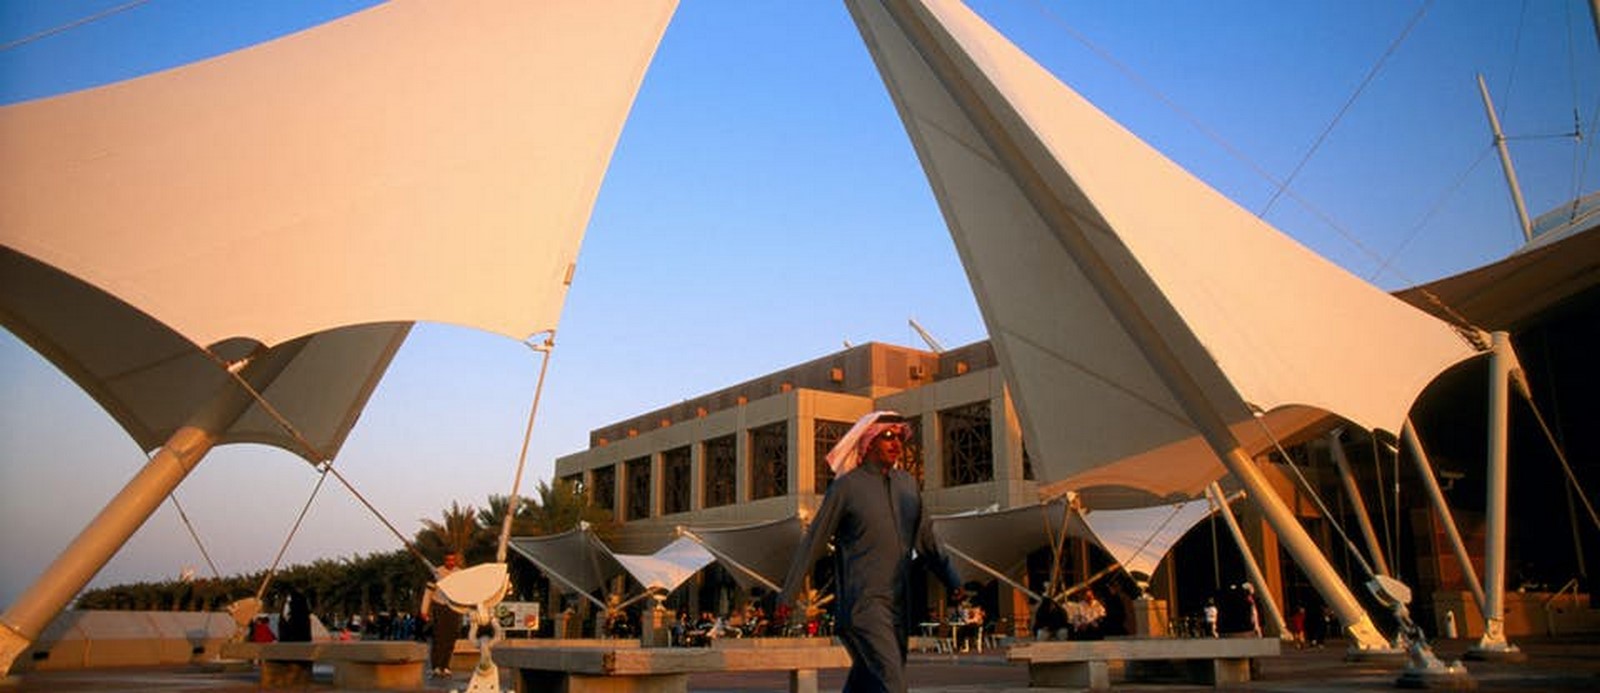 15 Places to visit in Kuwait for the Travelling Architect - Sheet29